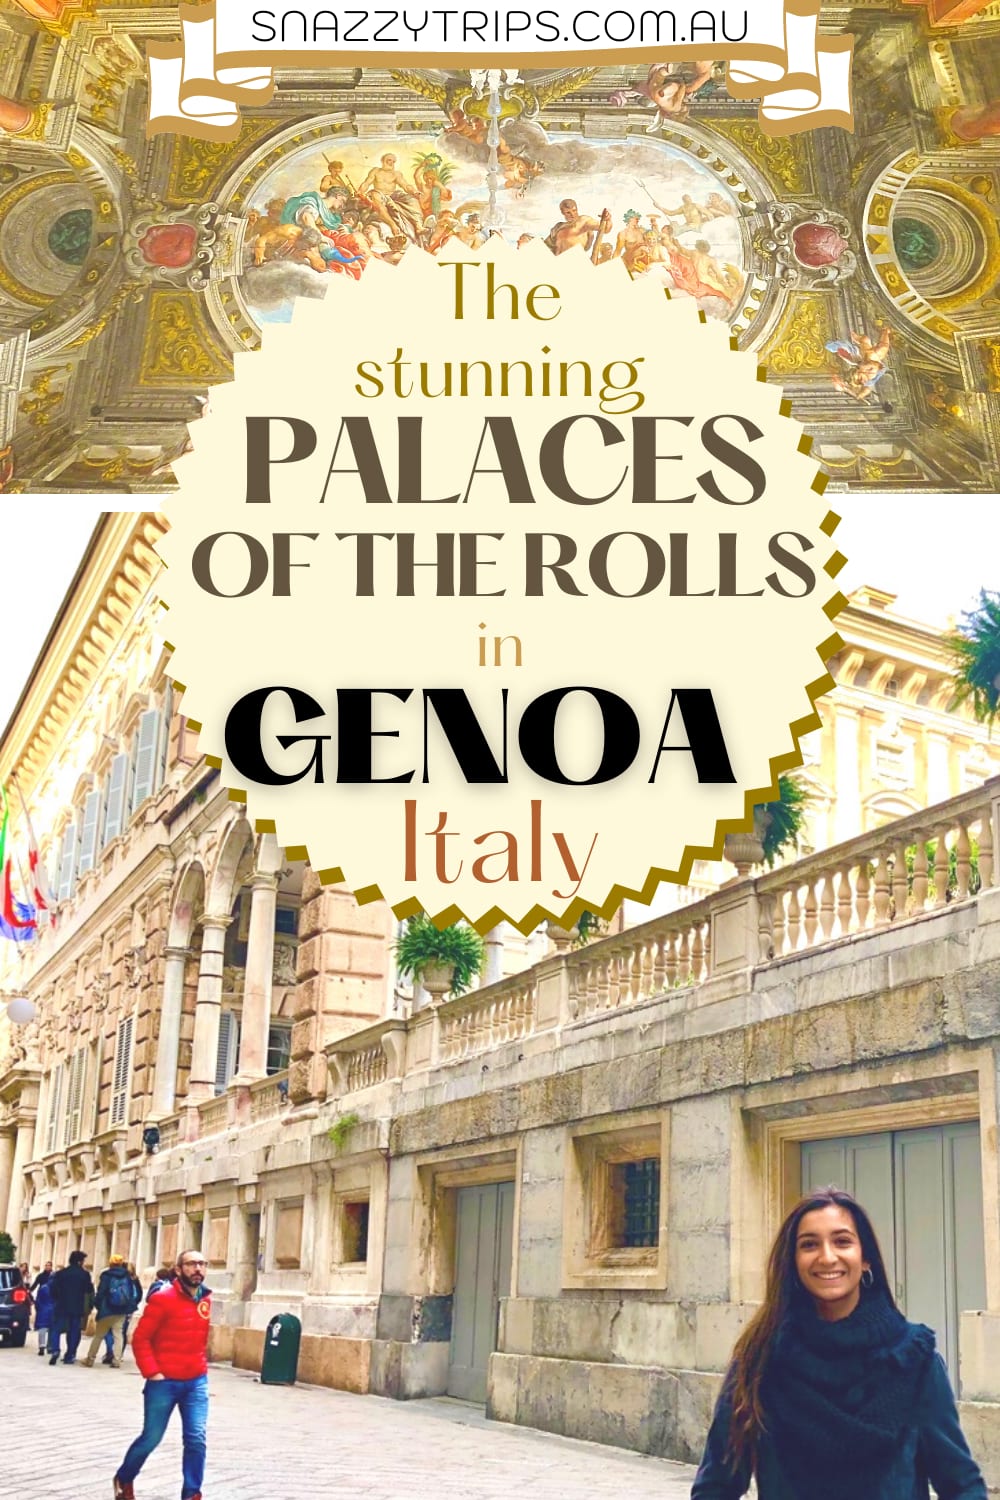 The Stunning Palaces Of The Rolls In Genoa